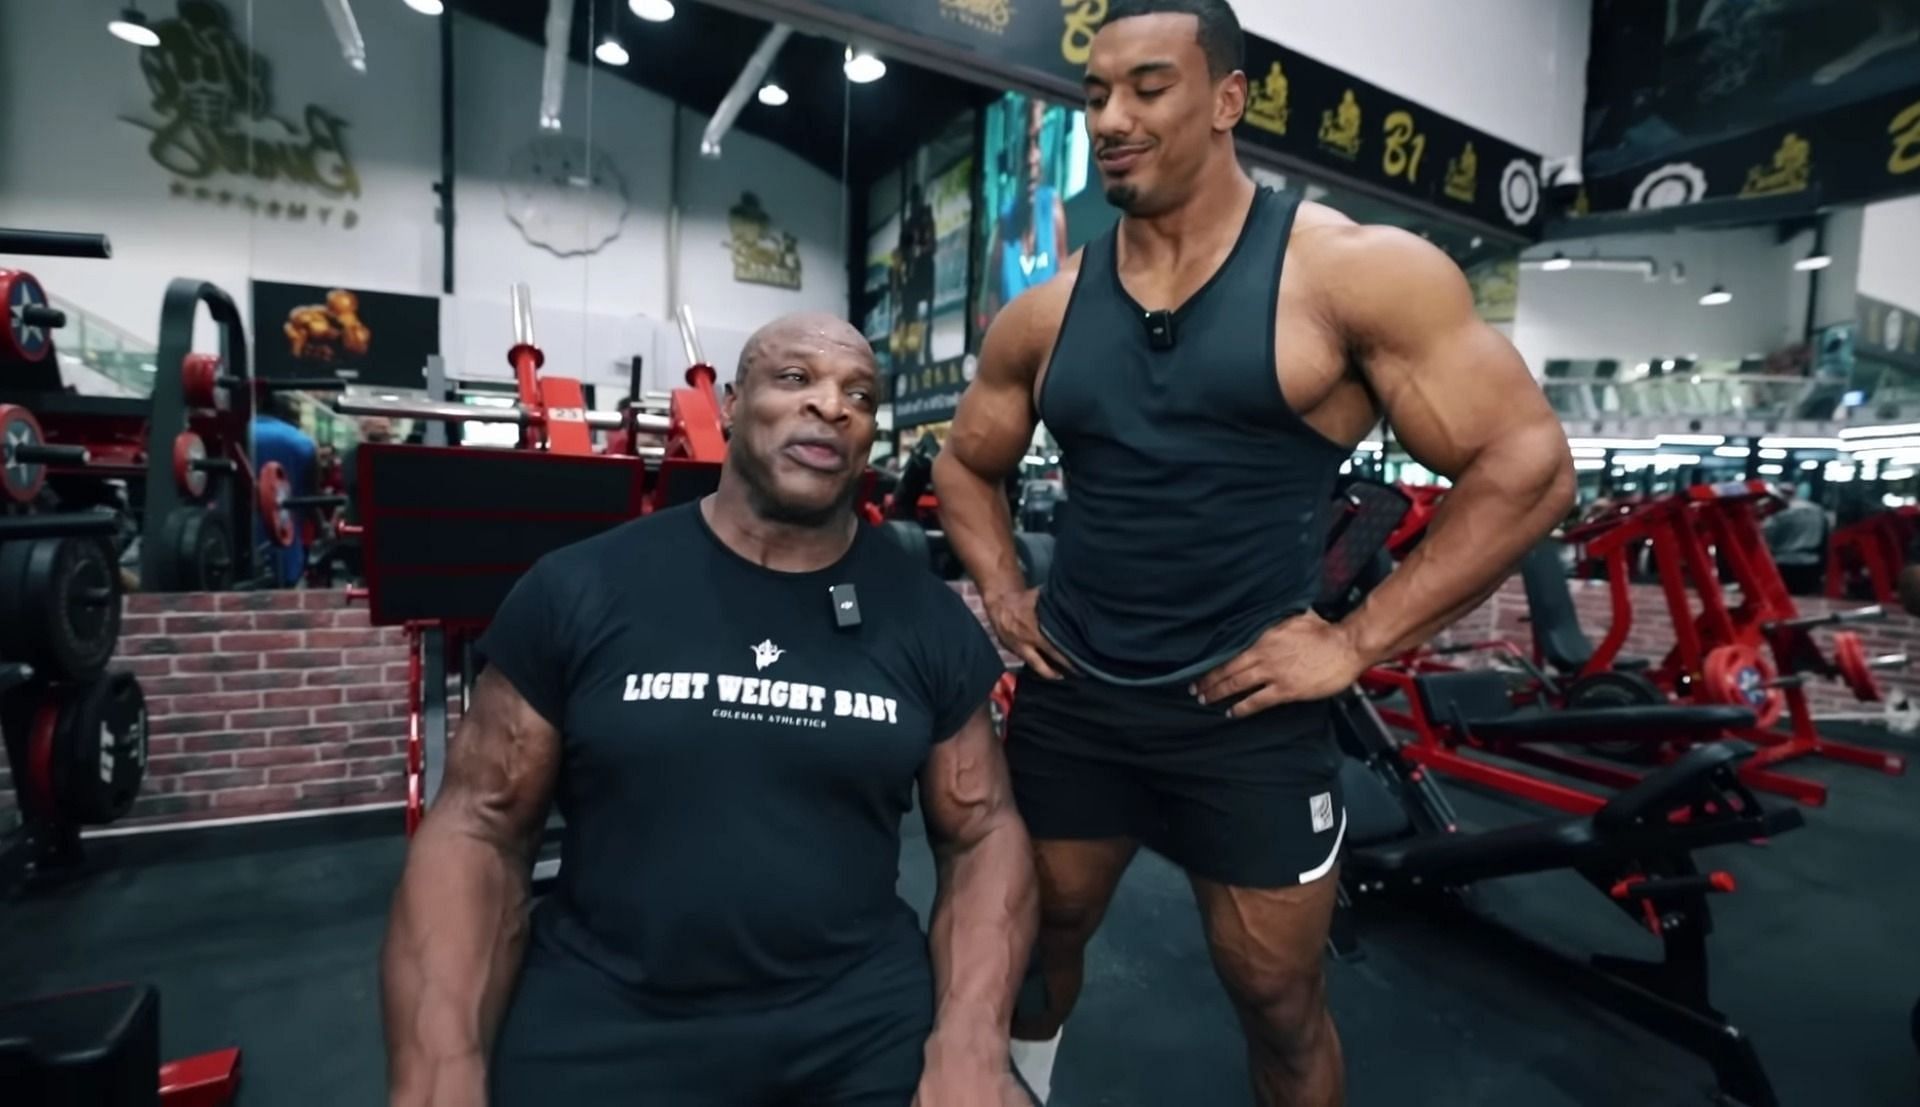 Ronnie Coleman and Larry Wheels (Image via YouTube/Ronnie Coleman)